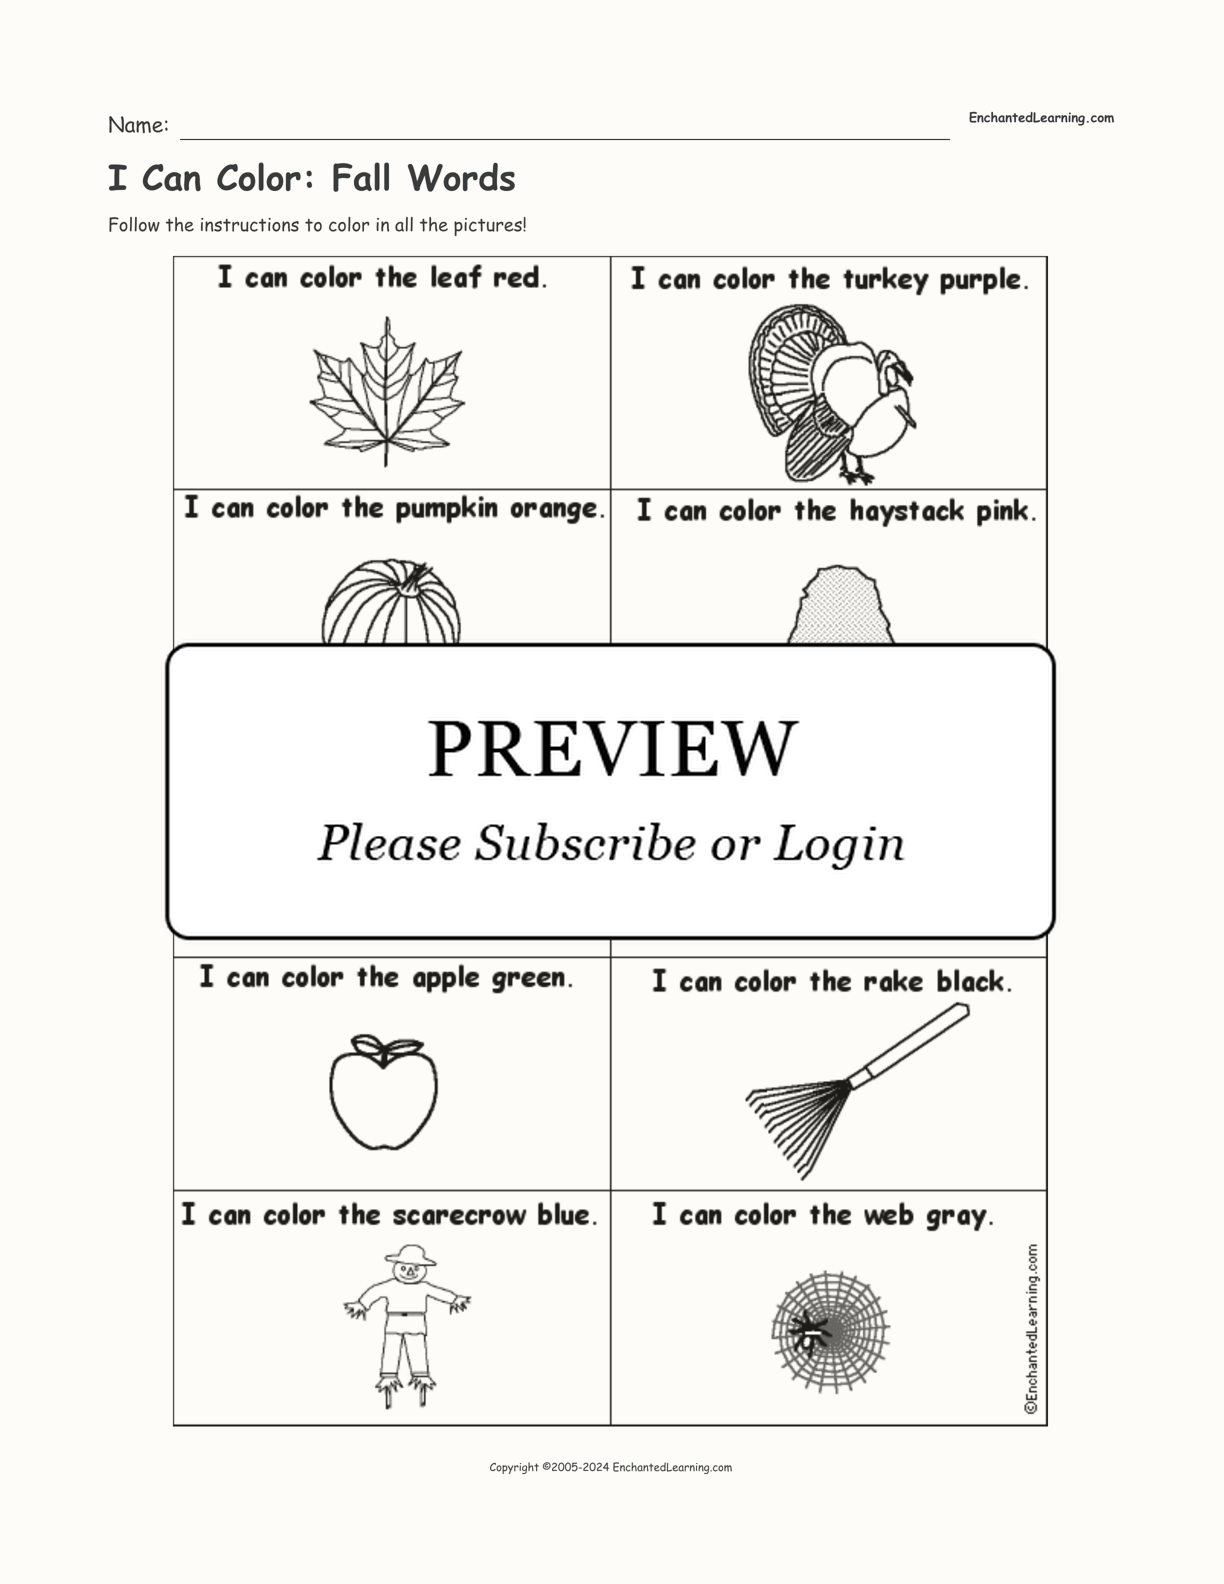 I Can Color: Fall Words interactive worksheet page 1